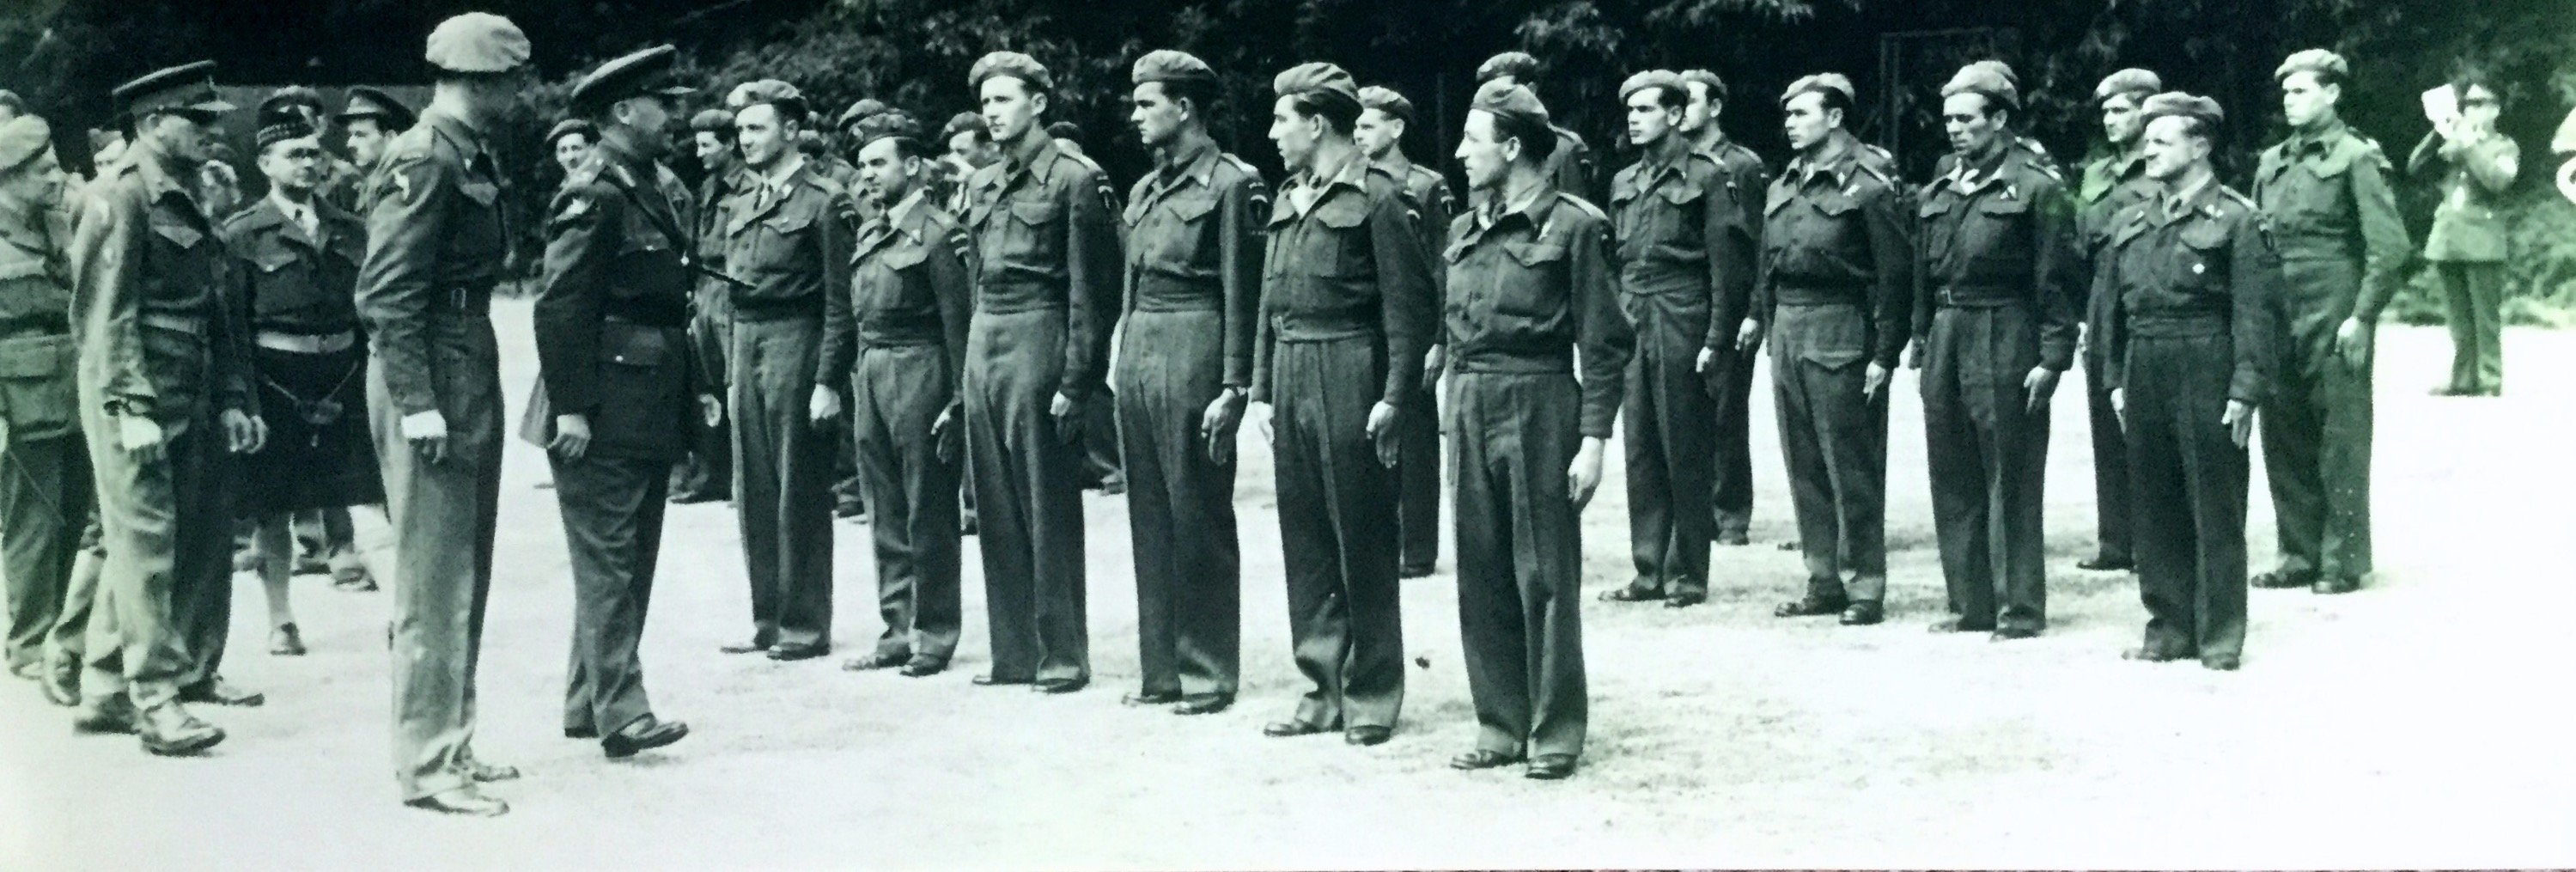 Virginia Water, Special Allied Airborne Reconnaissance 1944
